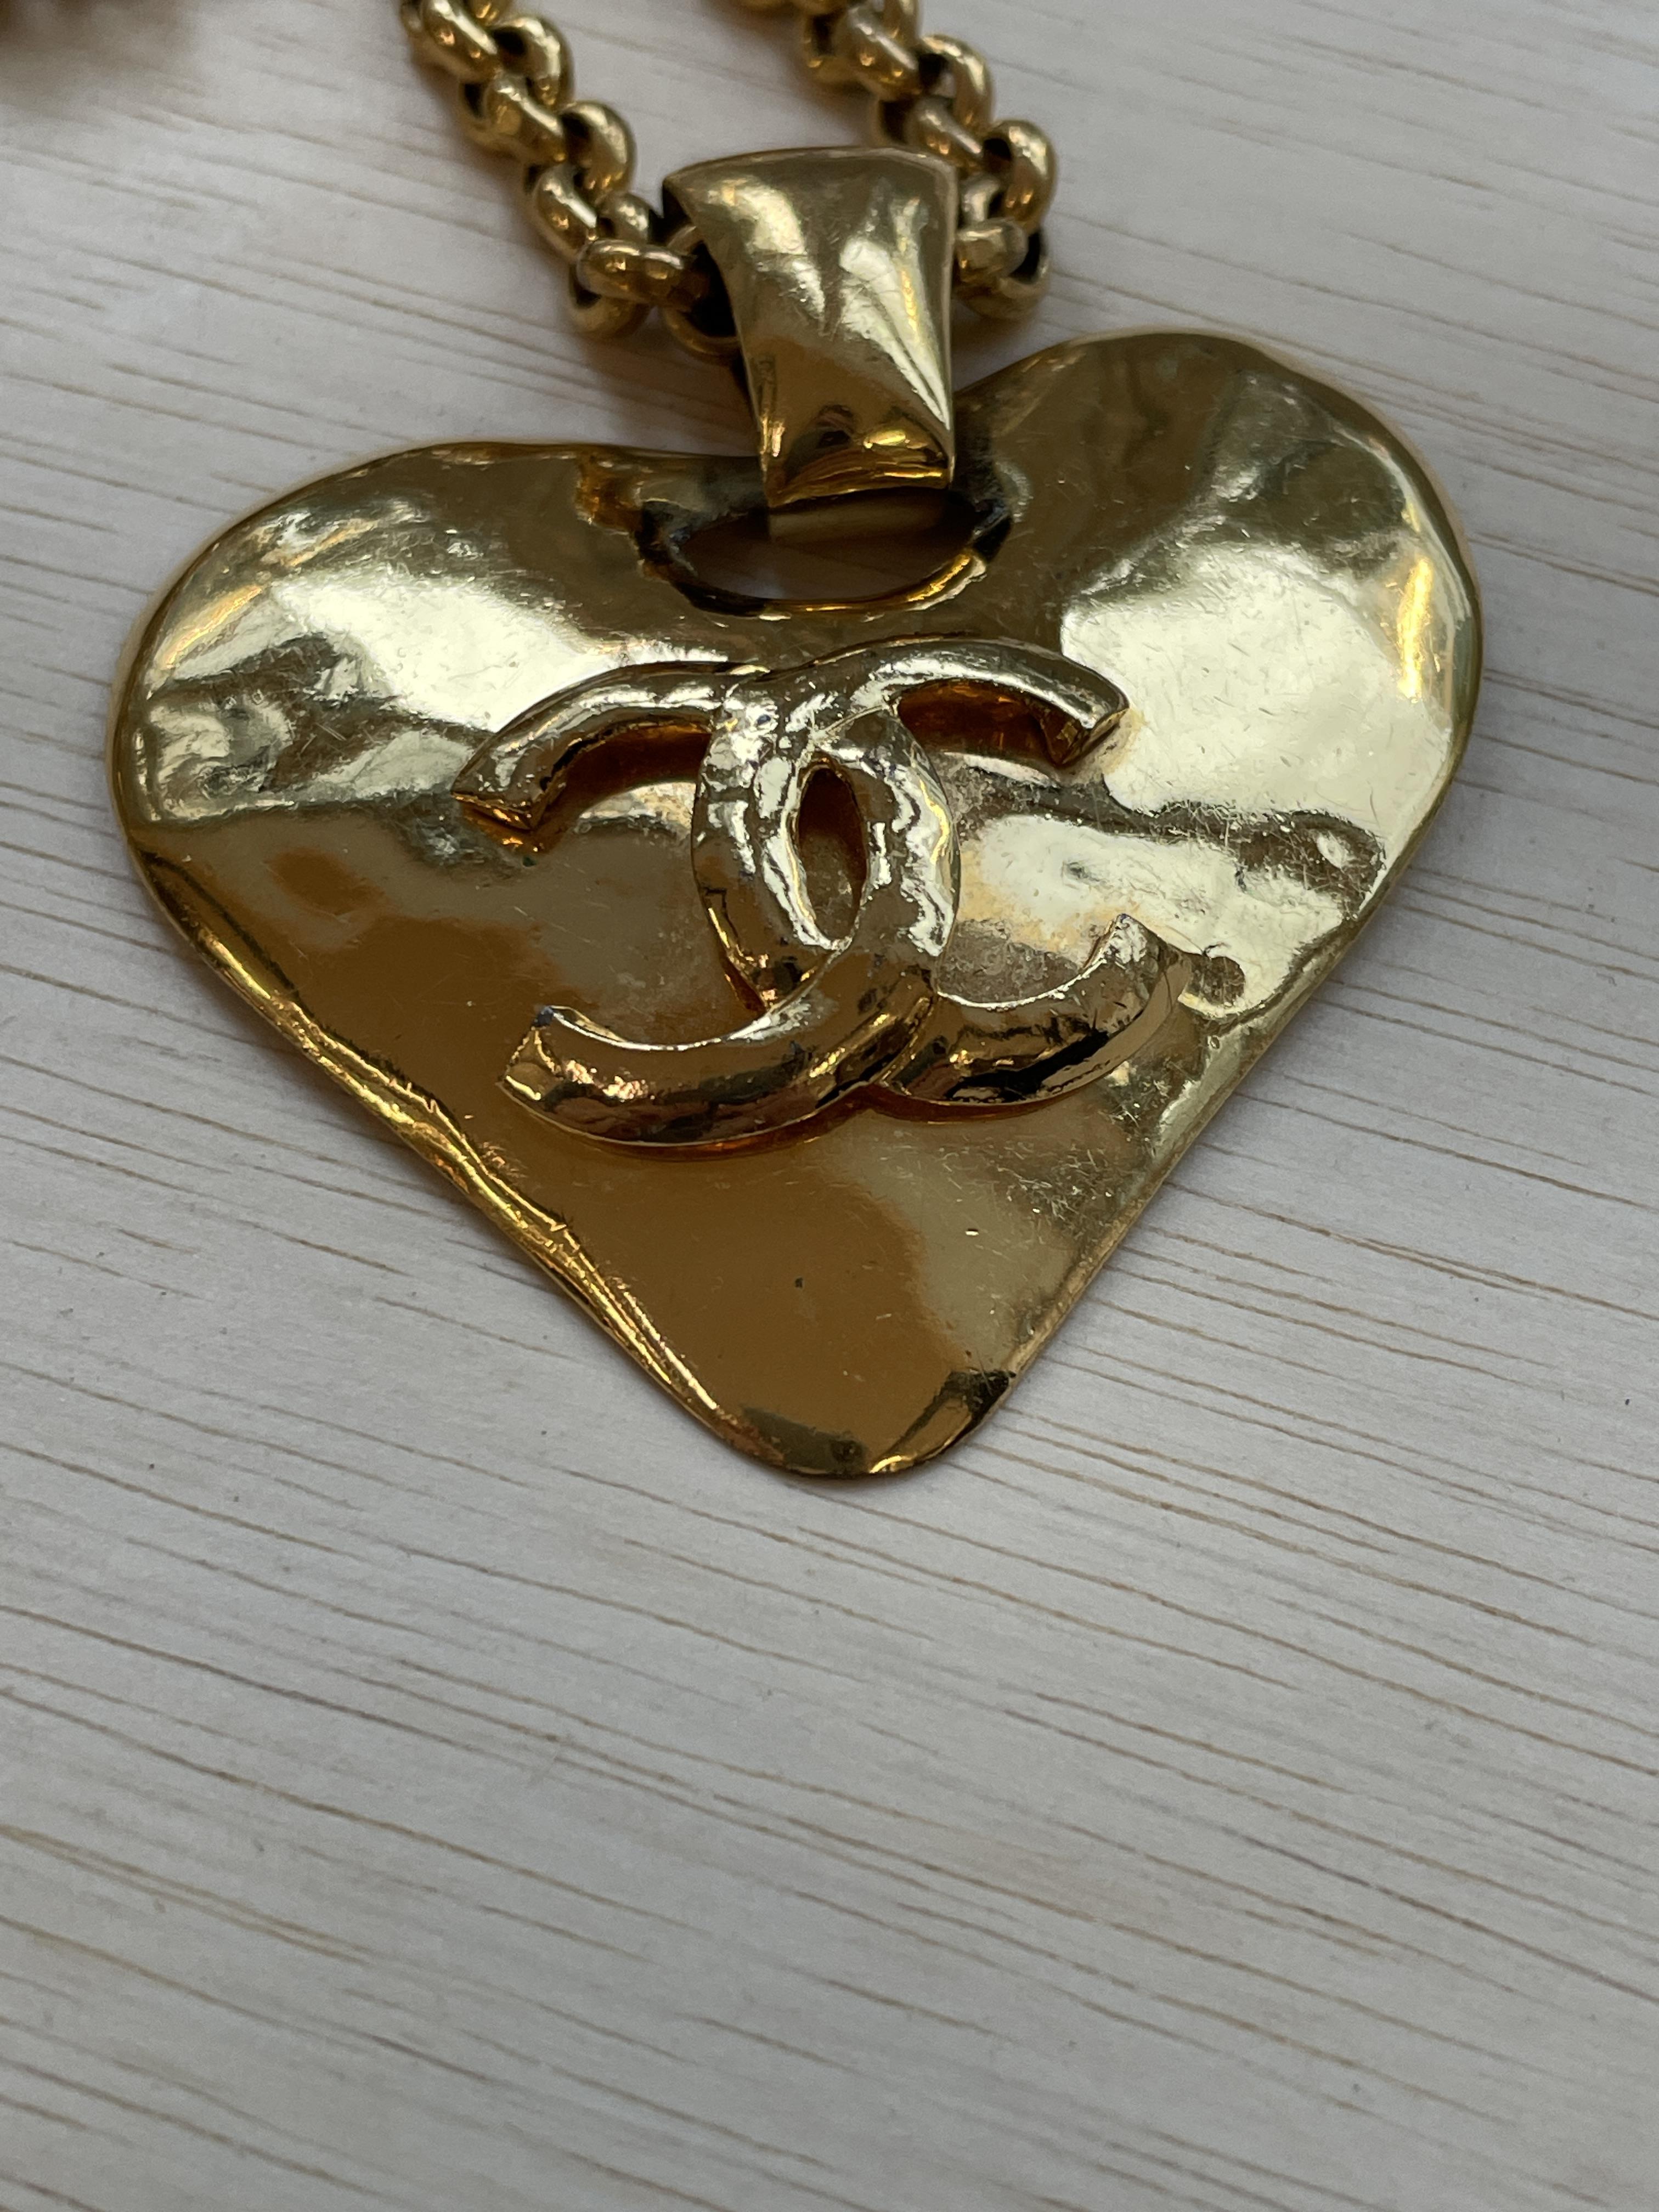 A CHANEL CC HEART PENDANT NECKLACE - Image 3 of 9